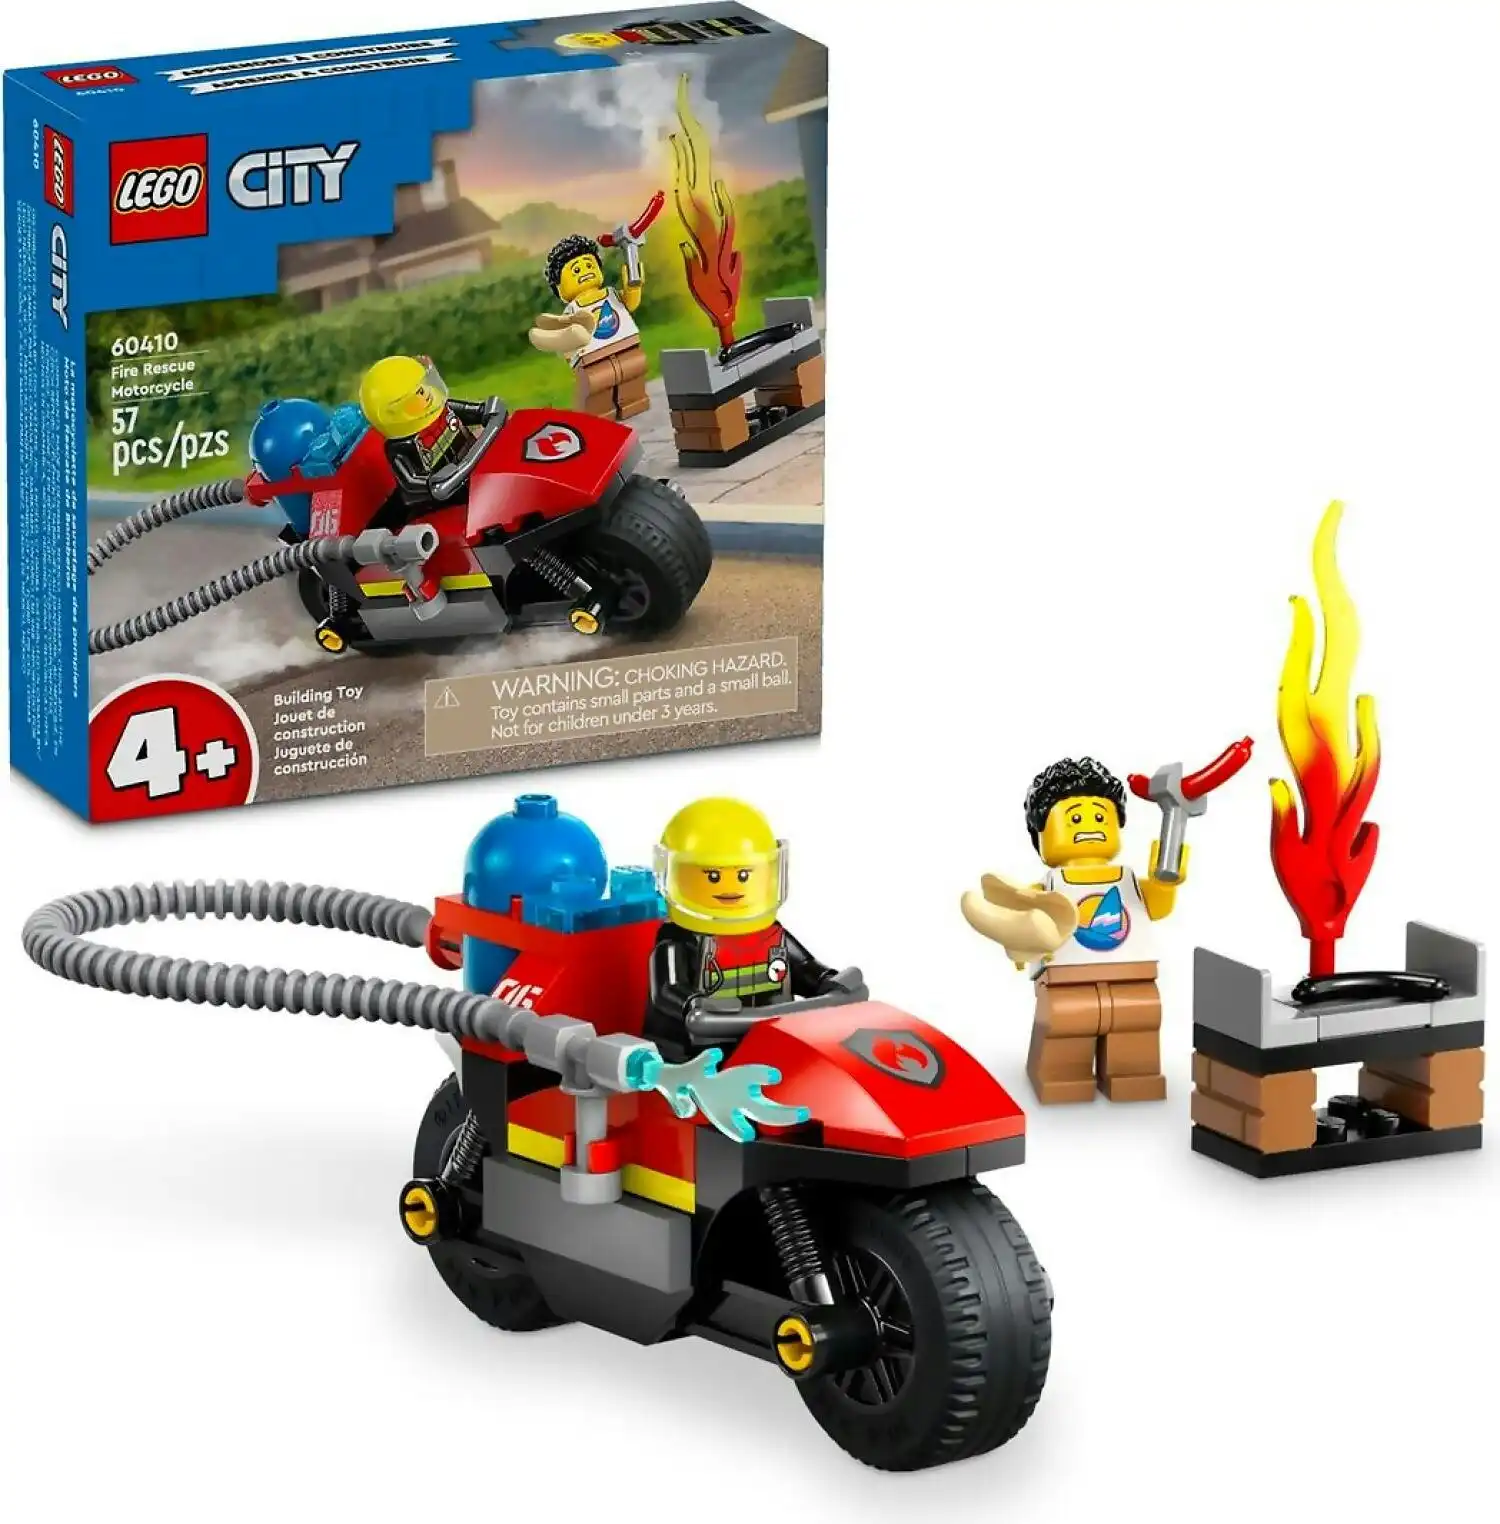 LEGO 60410 Fire Rescue Motorcycle - City 4+